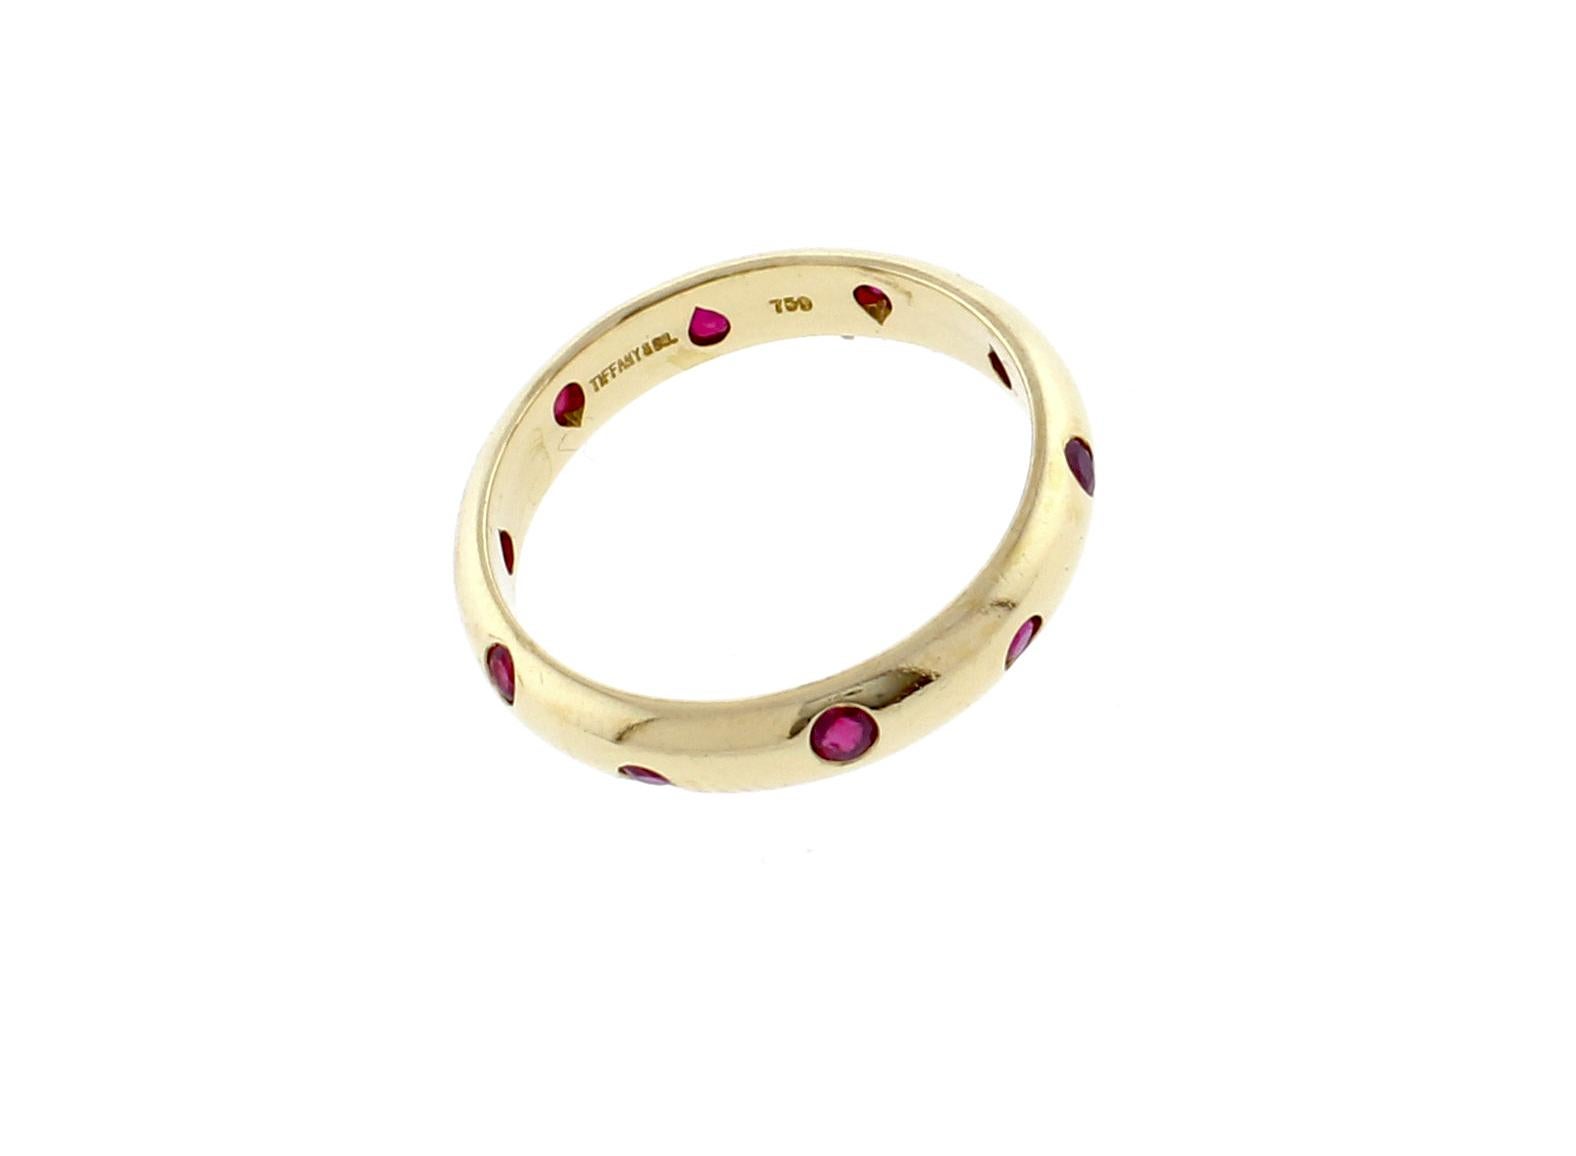 Fron Tiffany & Co.'s Etoile collection their  18 karat yellow gold ruby  Etoile ring, 4mm size 5